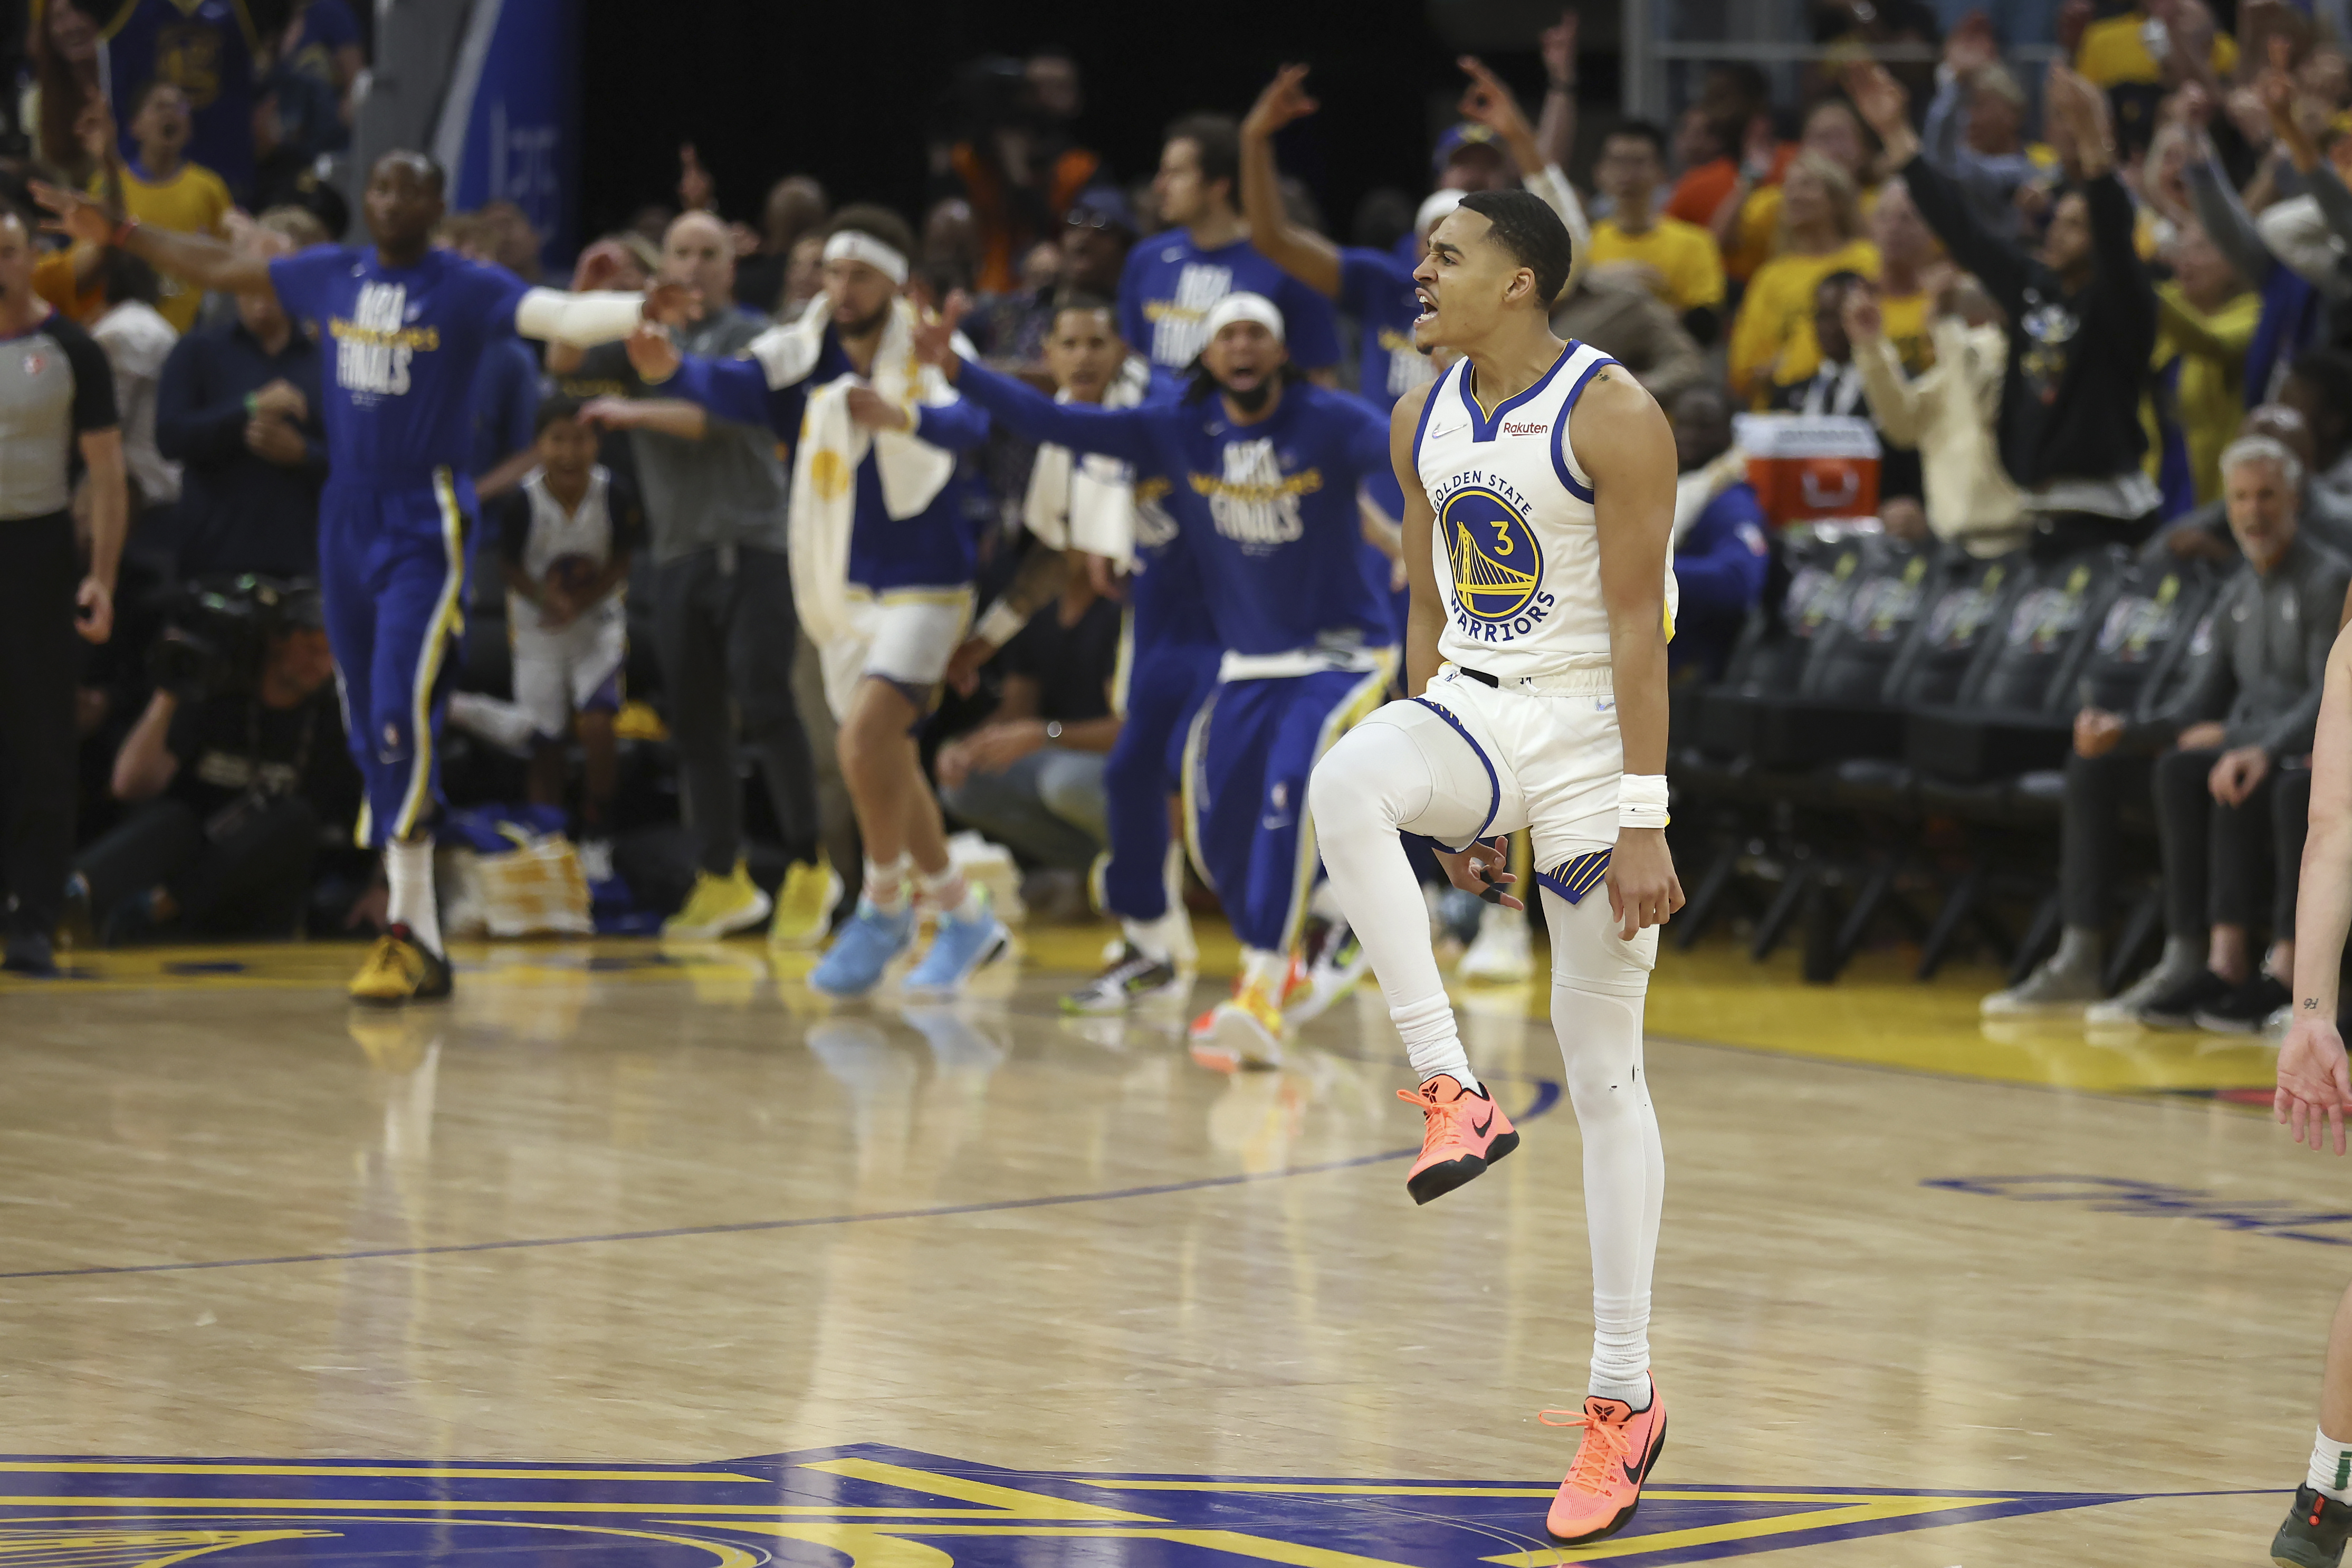 It was extemely fast.” Steph talks about how quickly the Jordan Poole